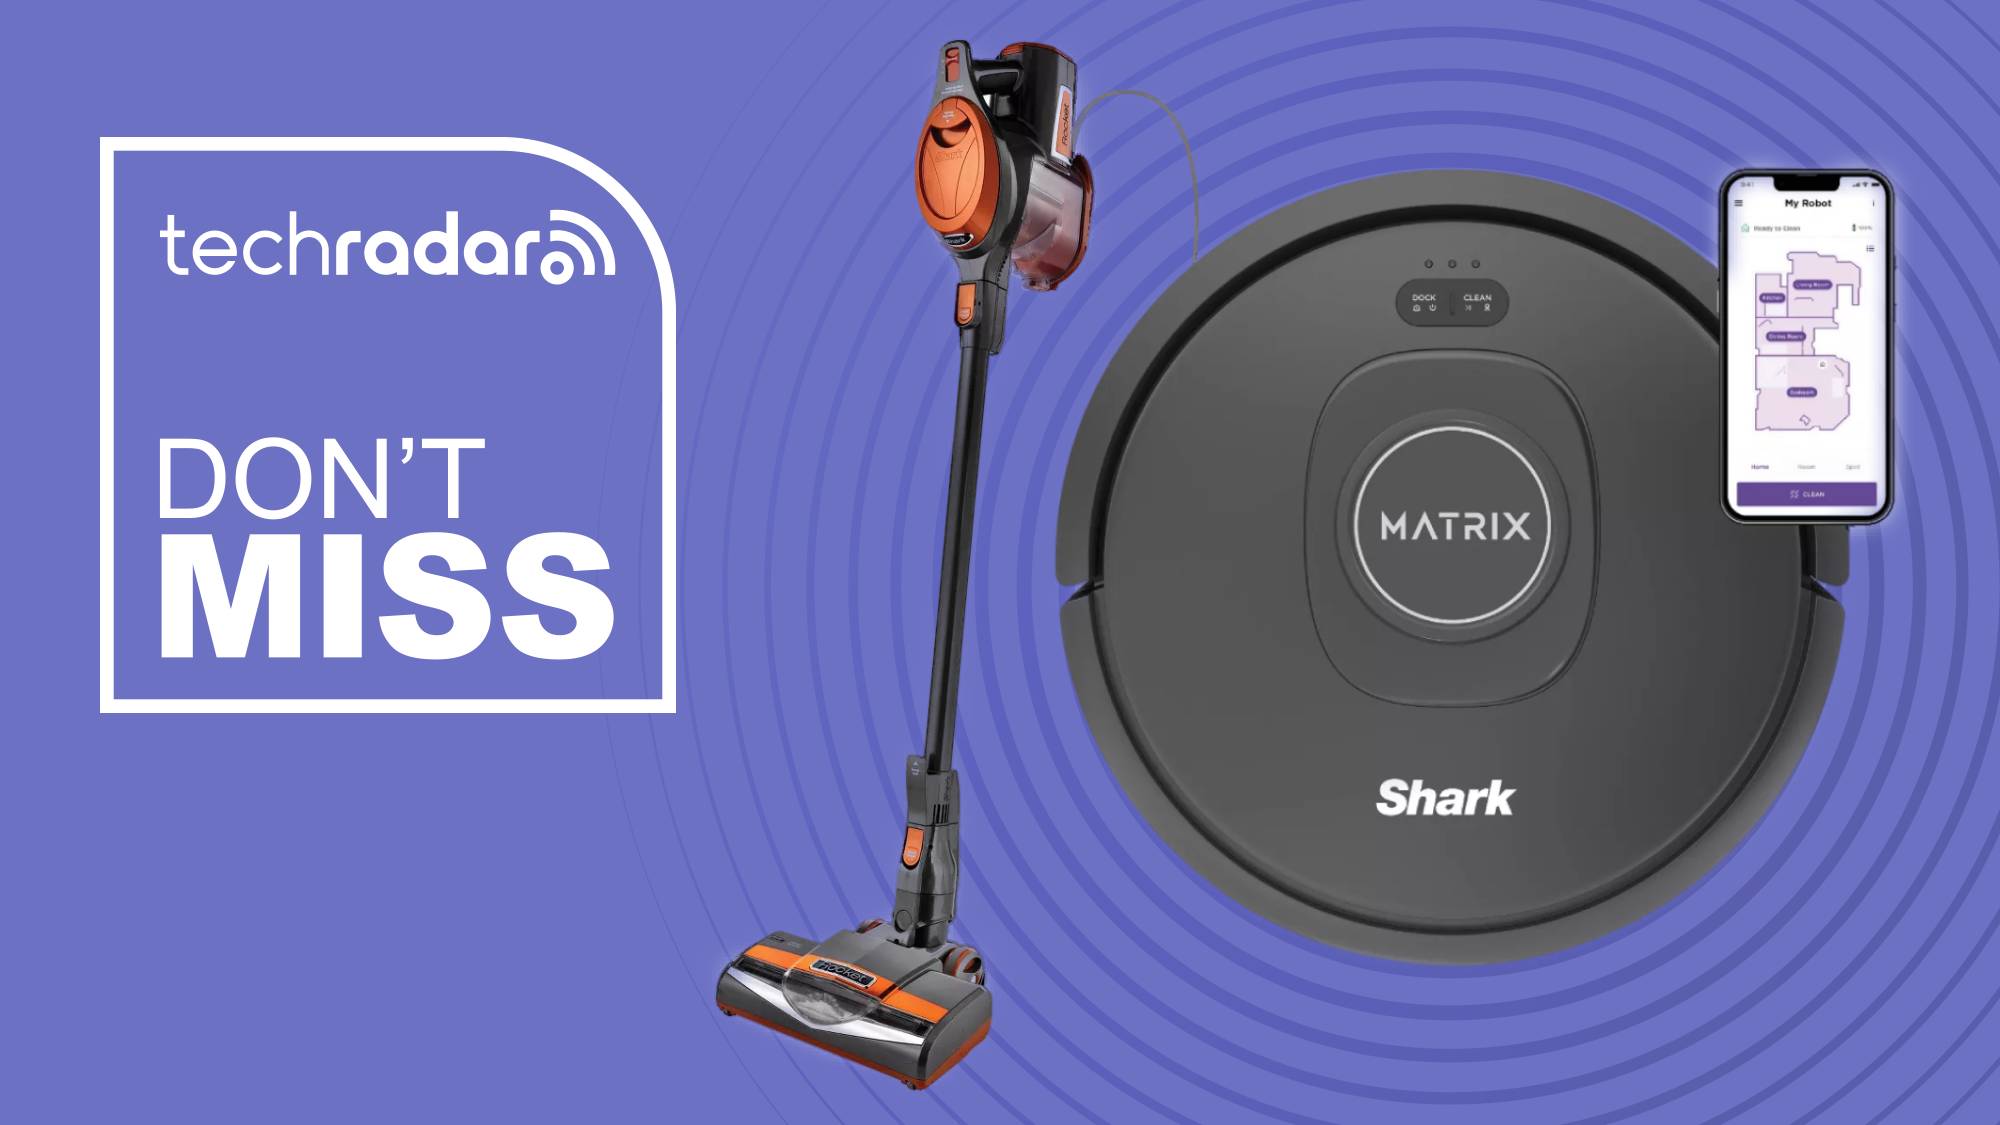 New year, new vacuum - check out Shark's January deals before it's too late